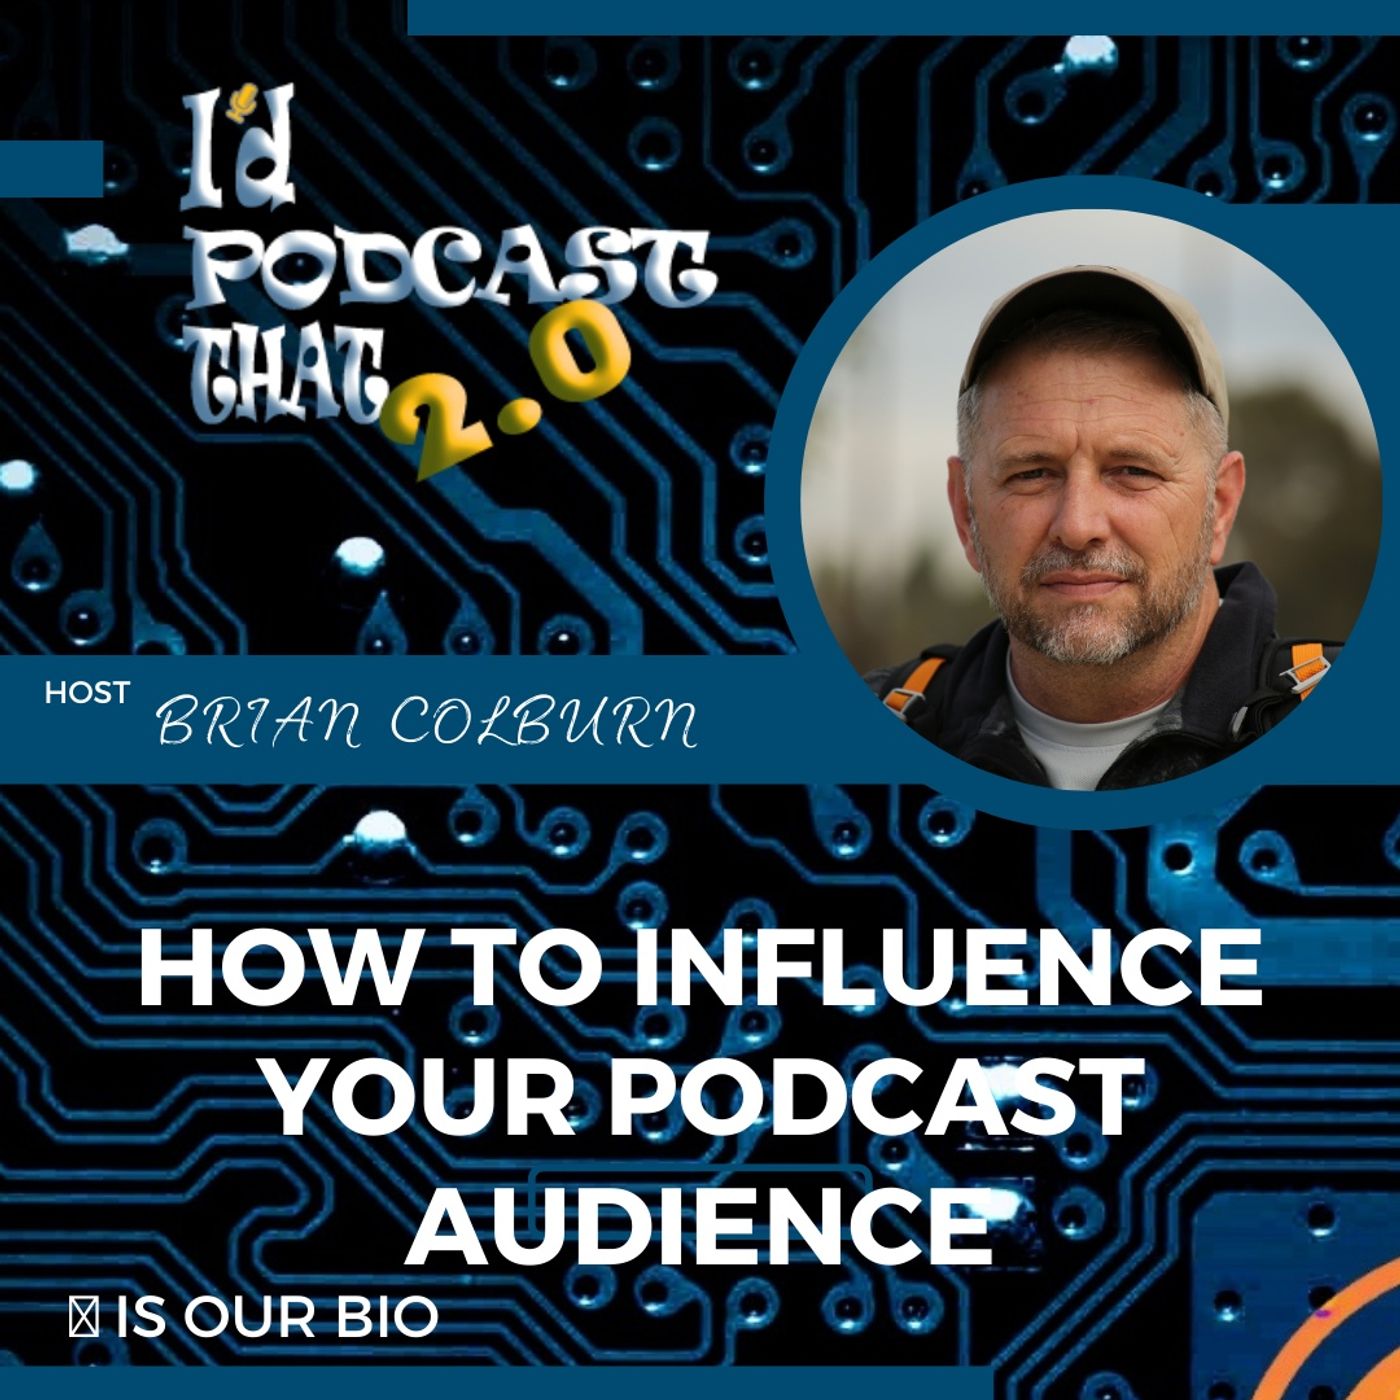 How to Influence your Podcast Audience